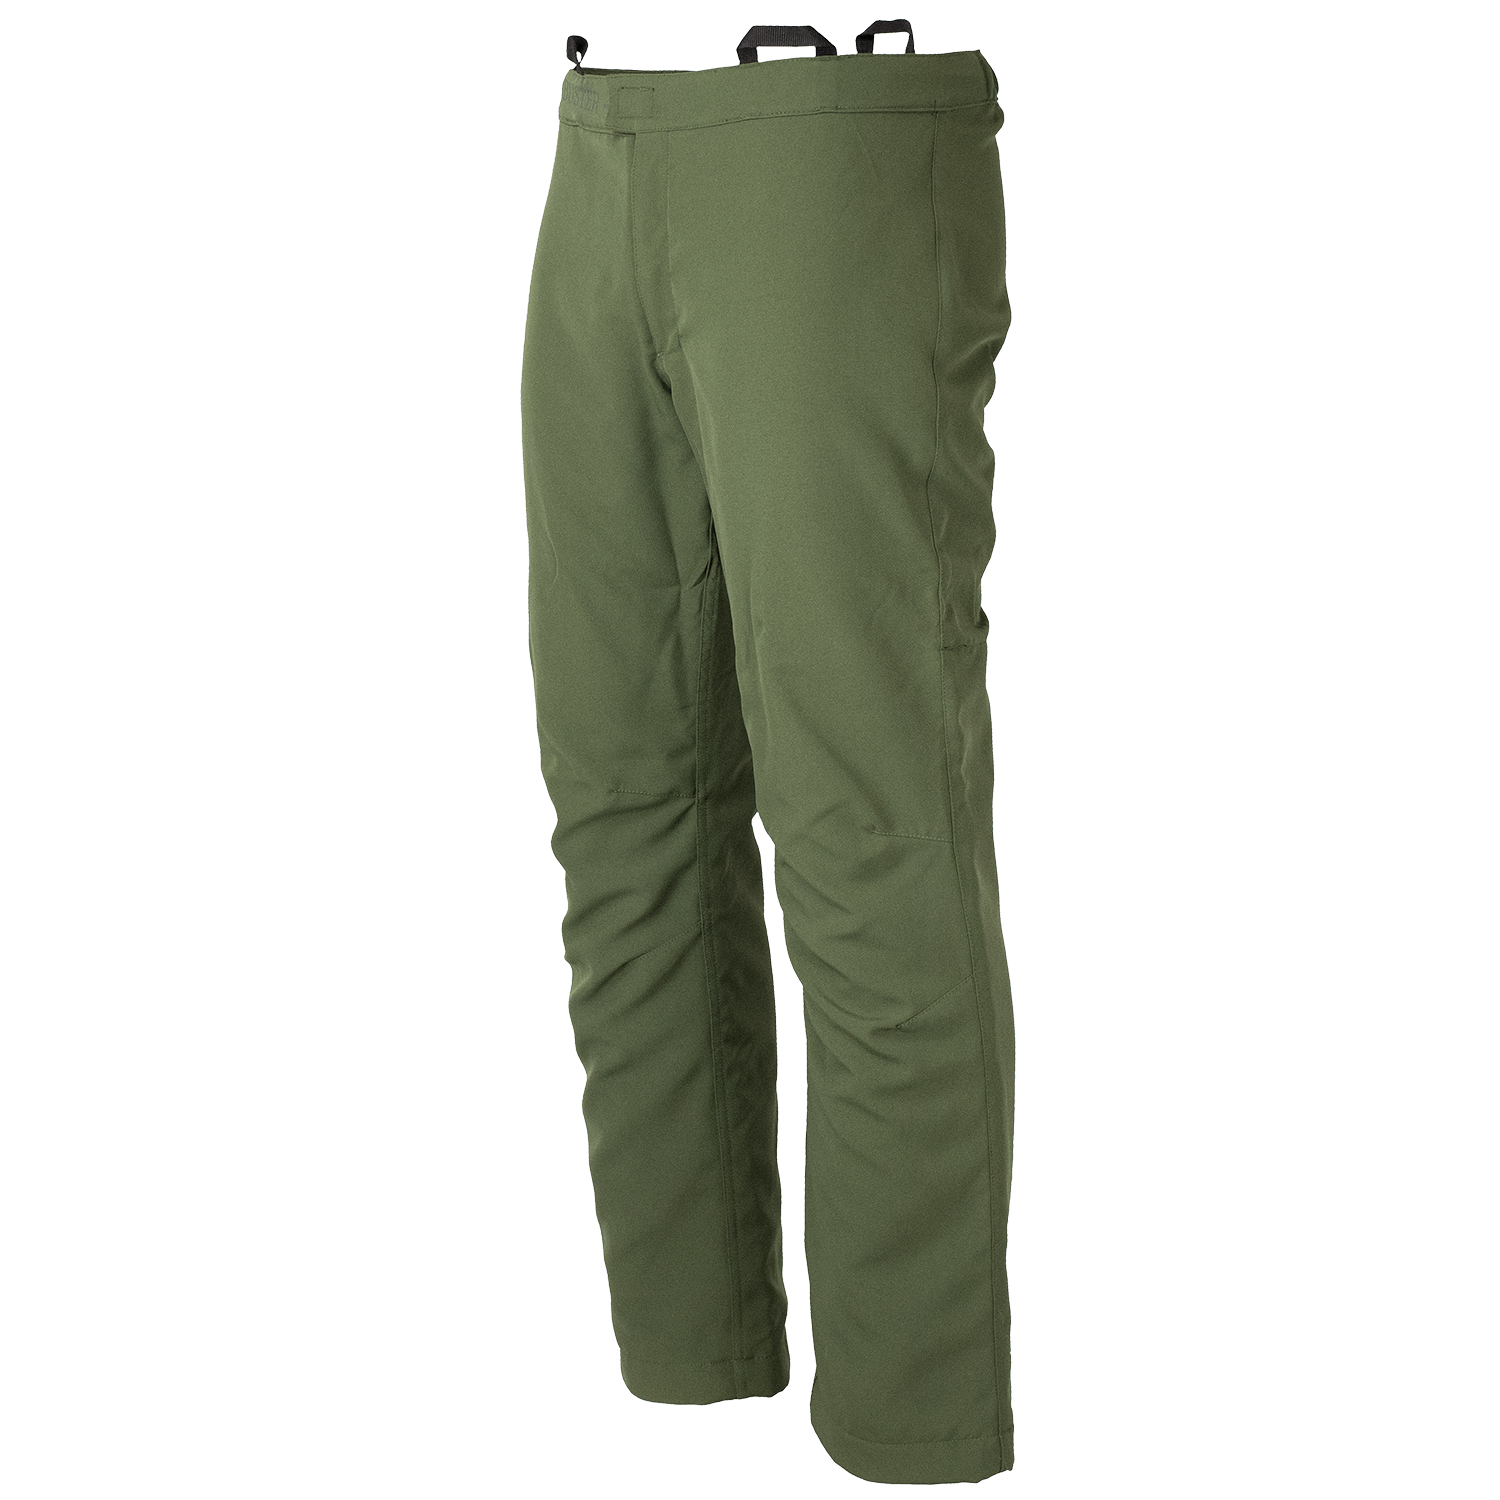 Pirscher Gear Boarbuster Protective Underpants - Wild Boar Hunting